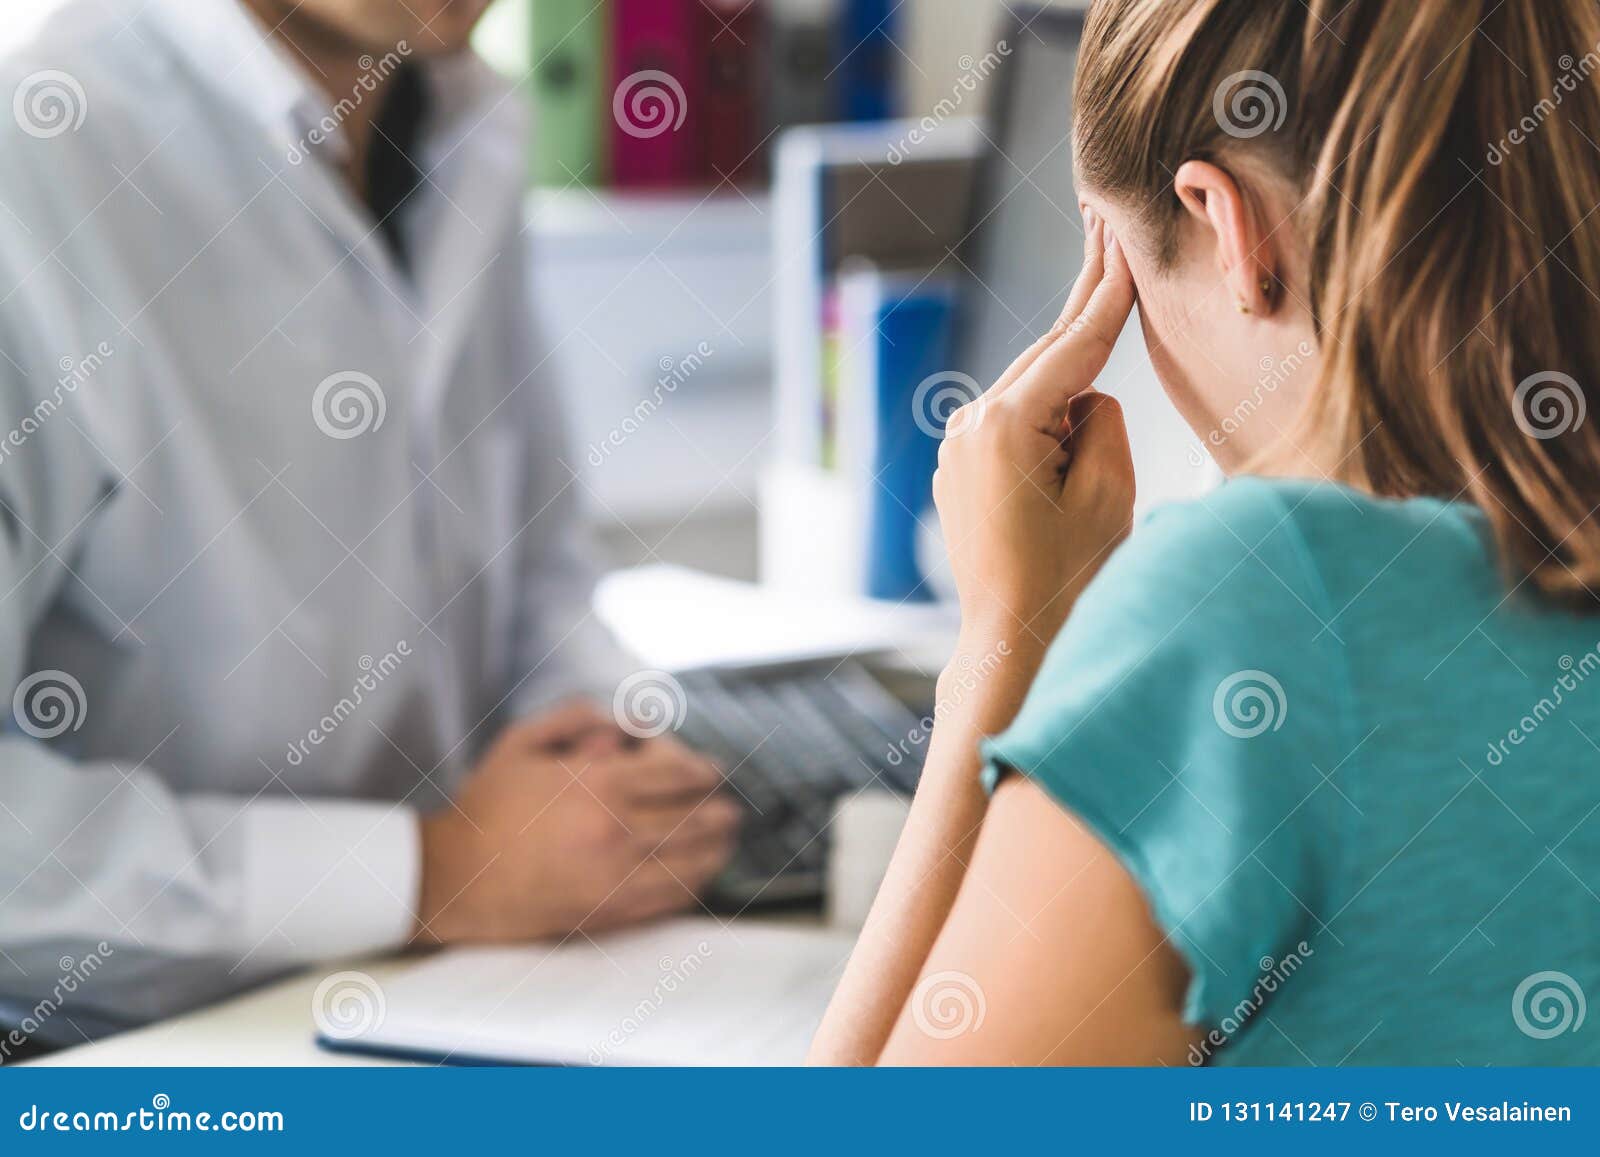 woman suffering from bad headache or migraine. appointment with doctor in office room.